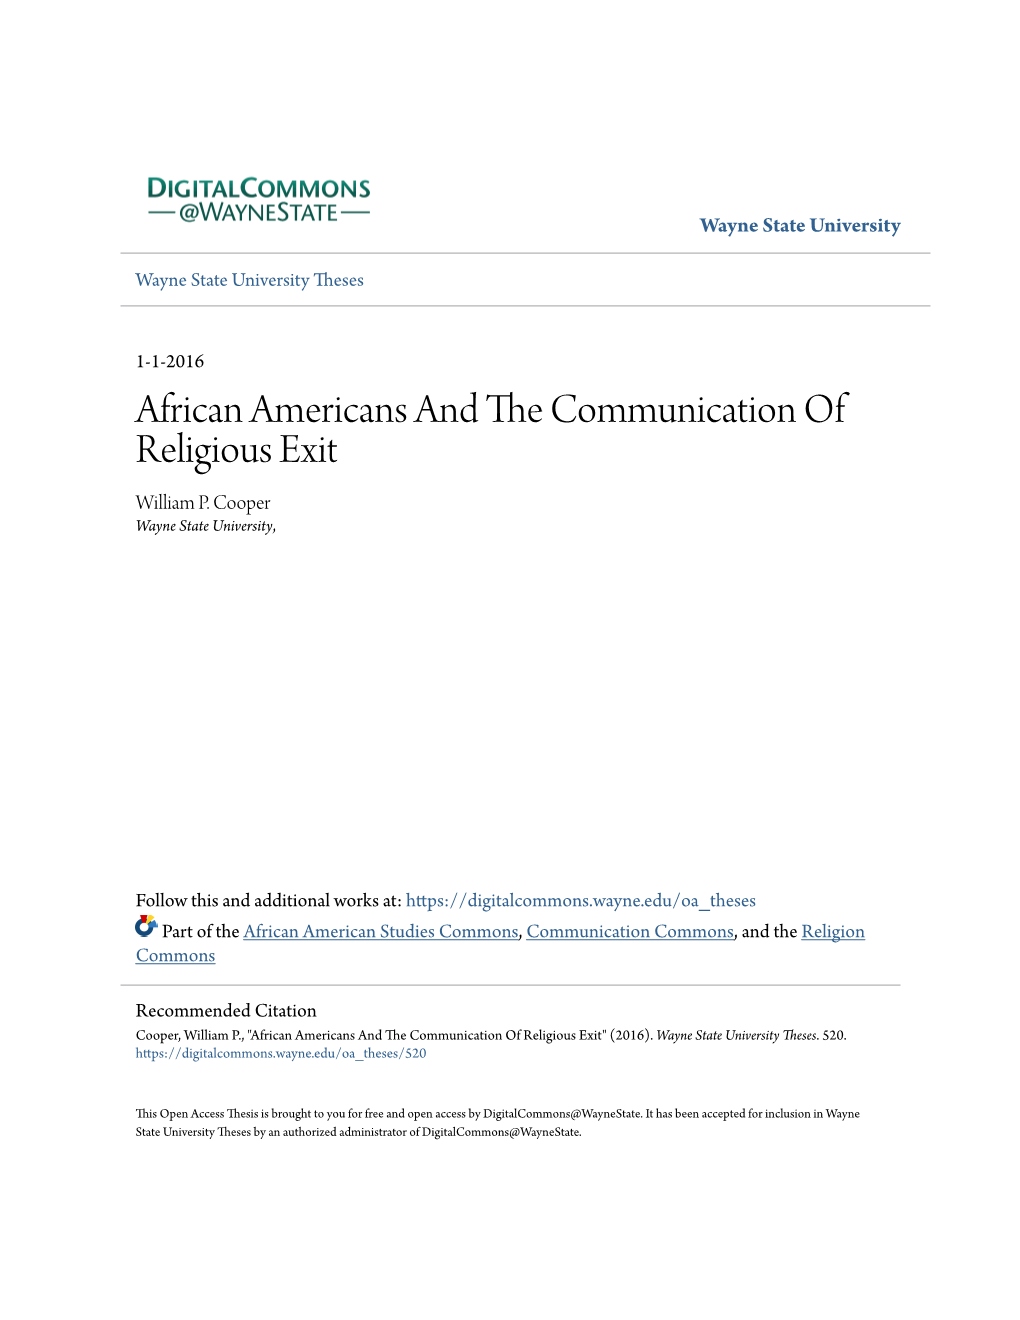 African Americans and the Communication of Religious Exit